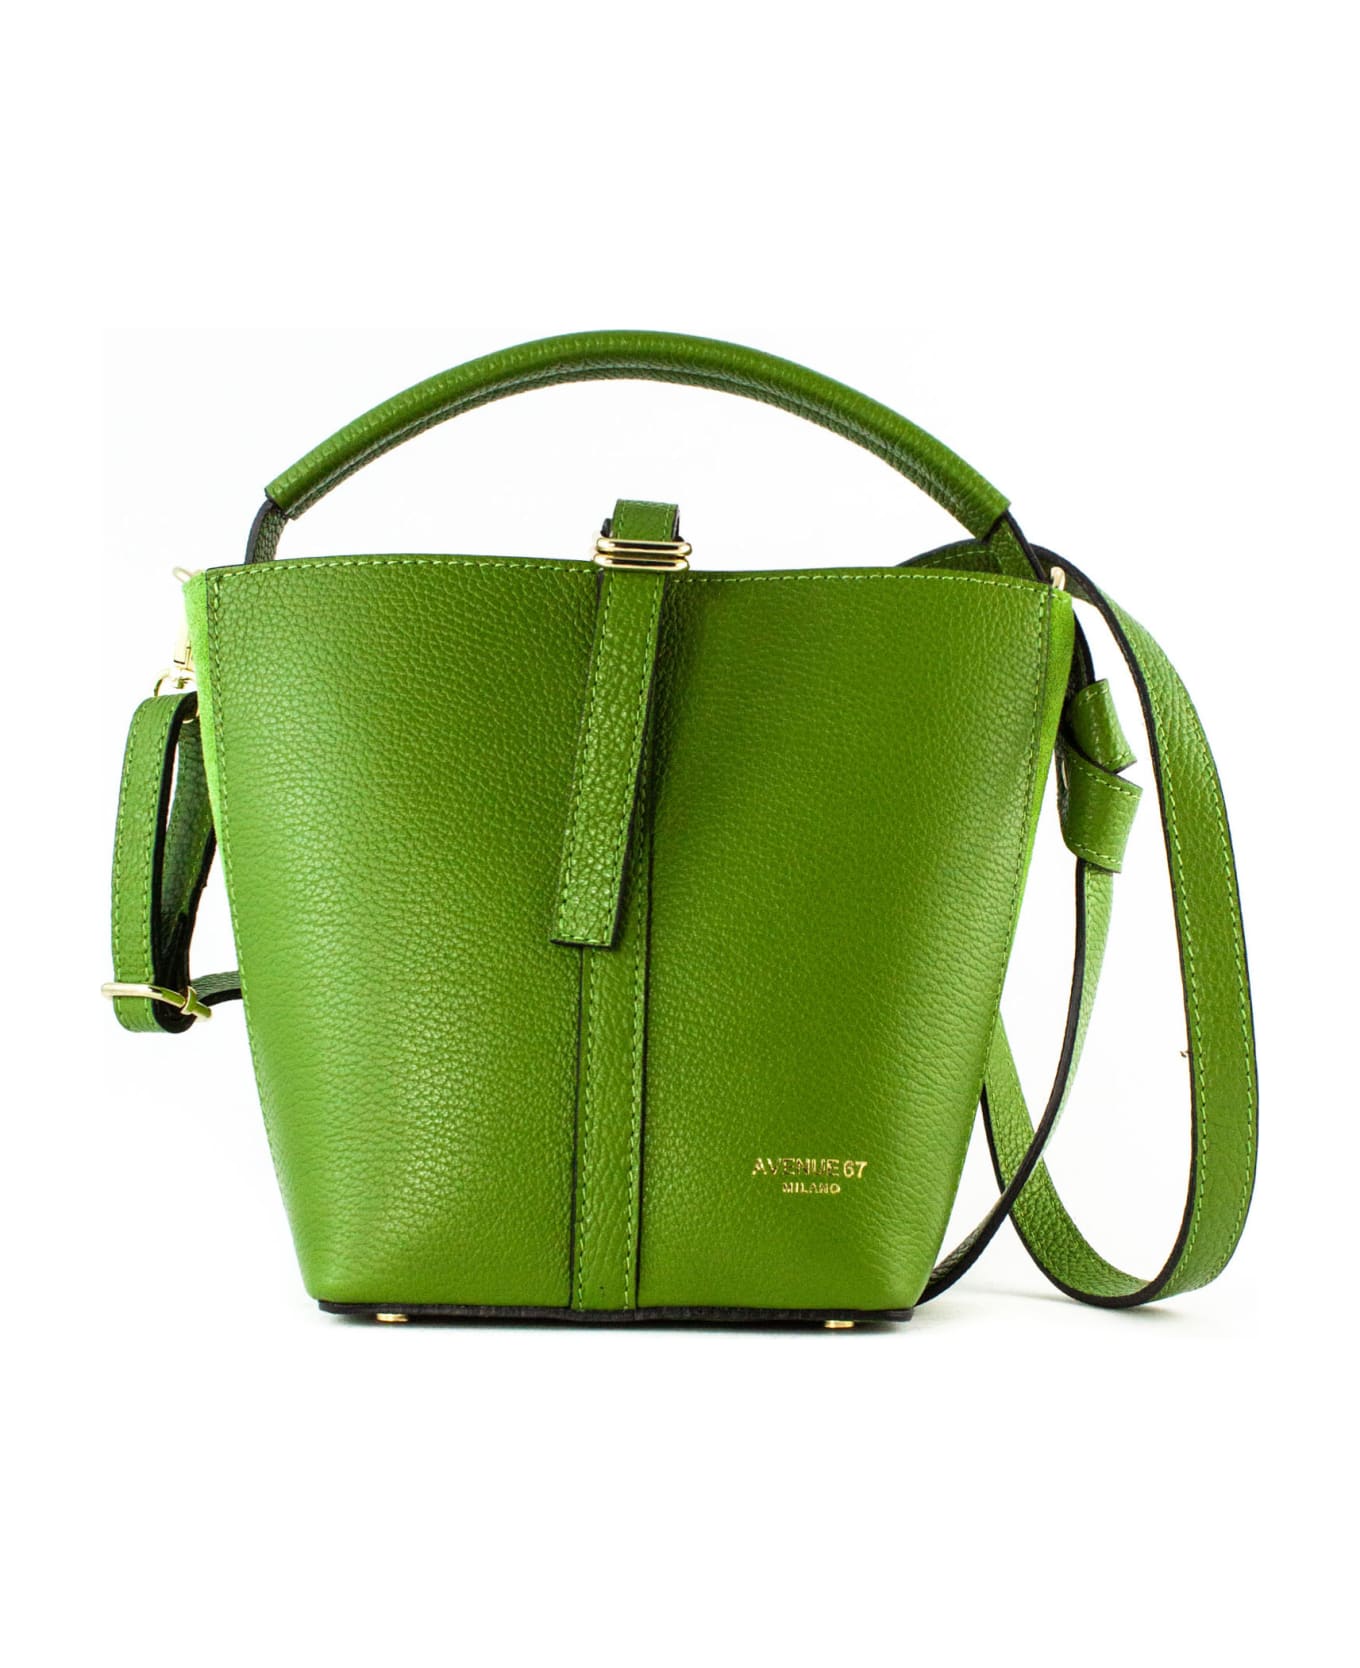 Avenue 67 Green Grained Leather Bag - Verde トートバッグ